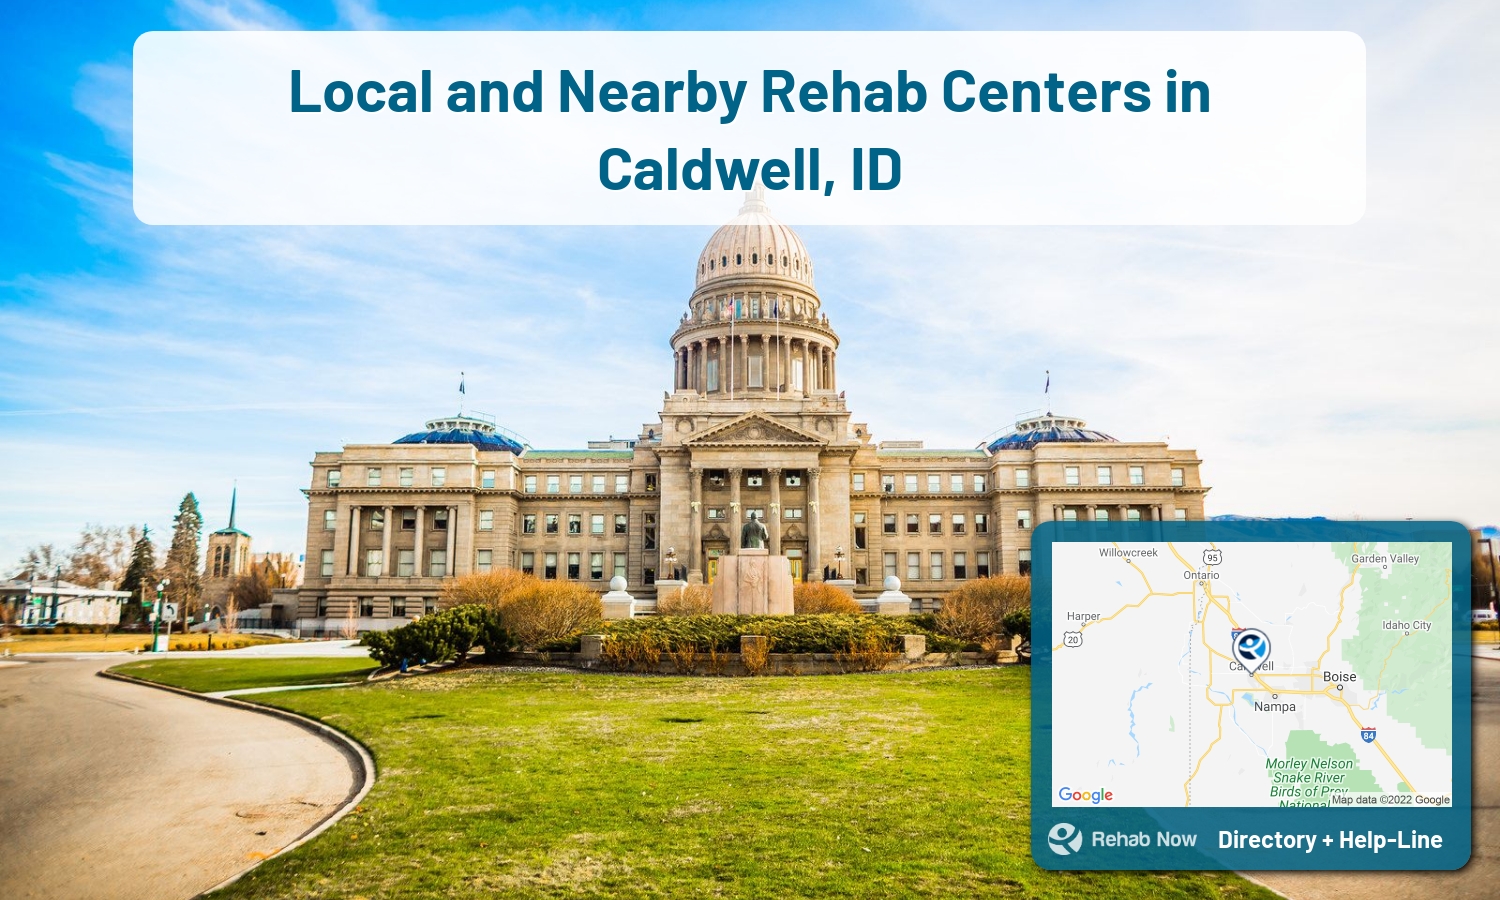 Caldwell, ID Treatment Centers. Find drug rehab in Caldwell, Idaho, or detox and treatment programs. Get the right help now!